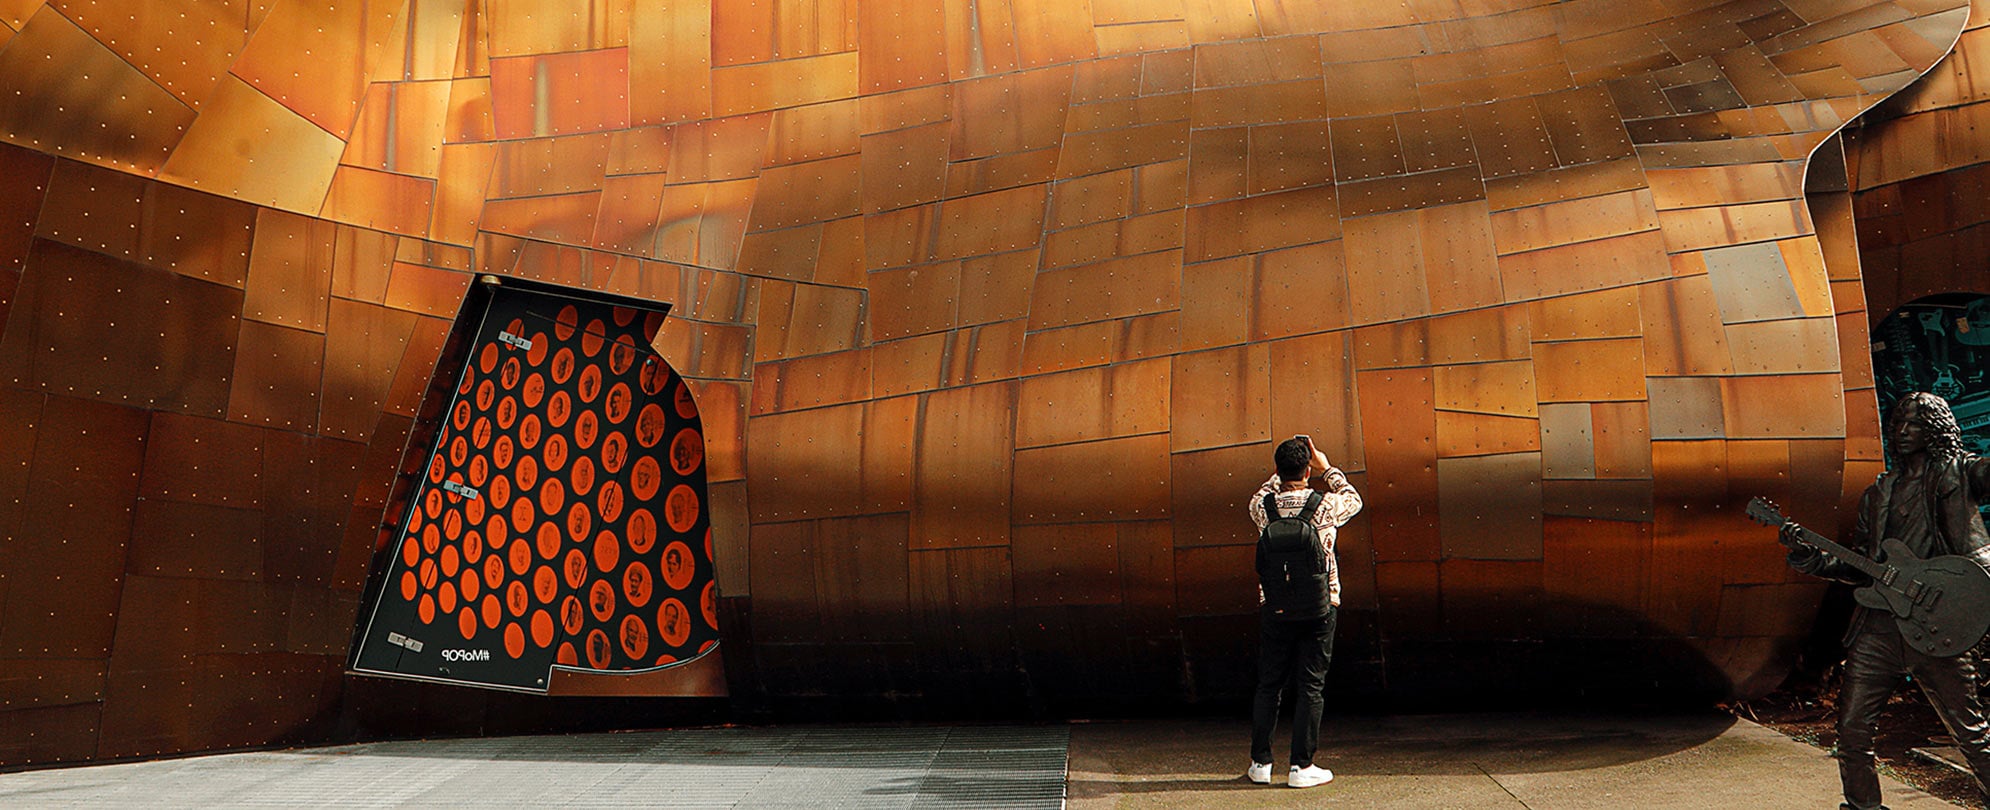 A man with a backpack holds up his phone to take a photo of the Museum of Pop Culture in Seattle